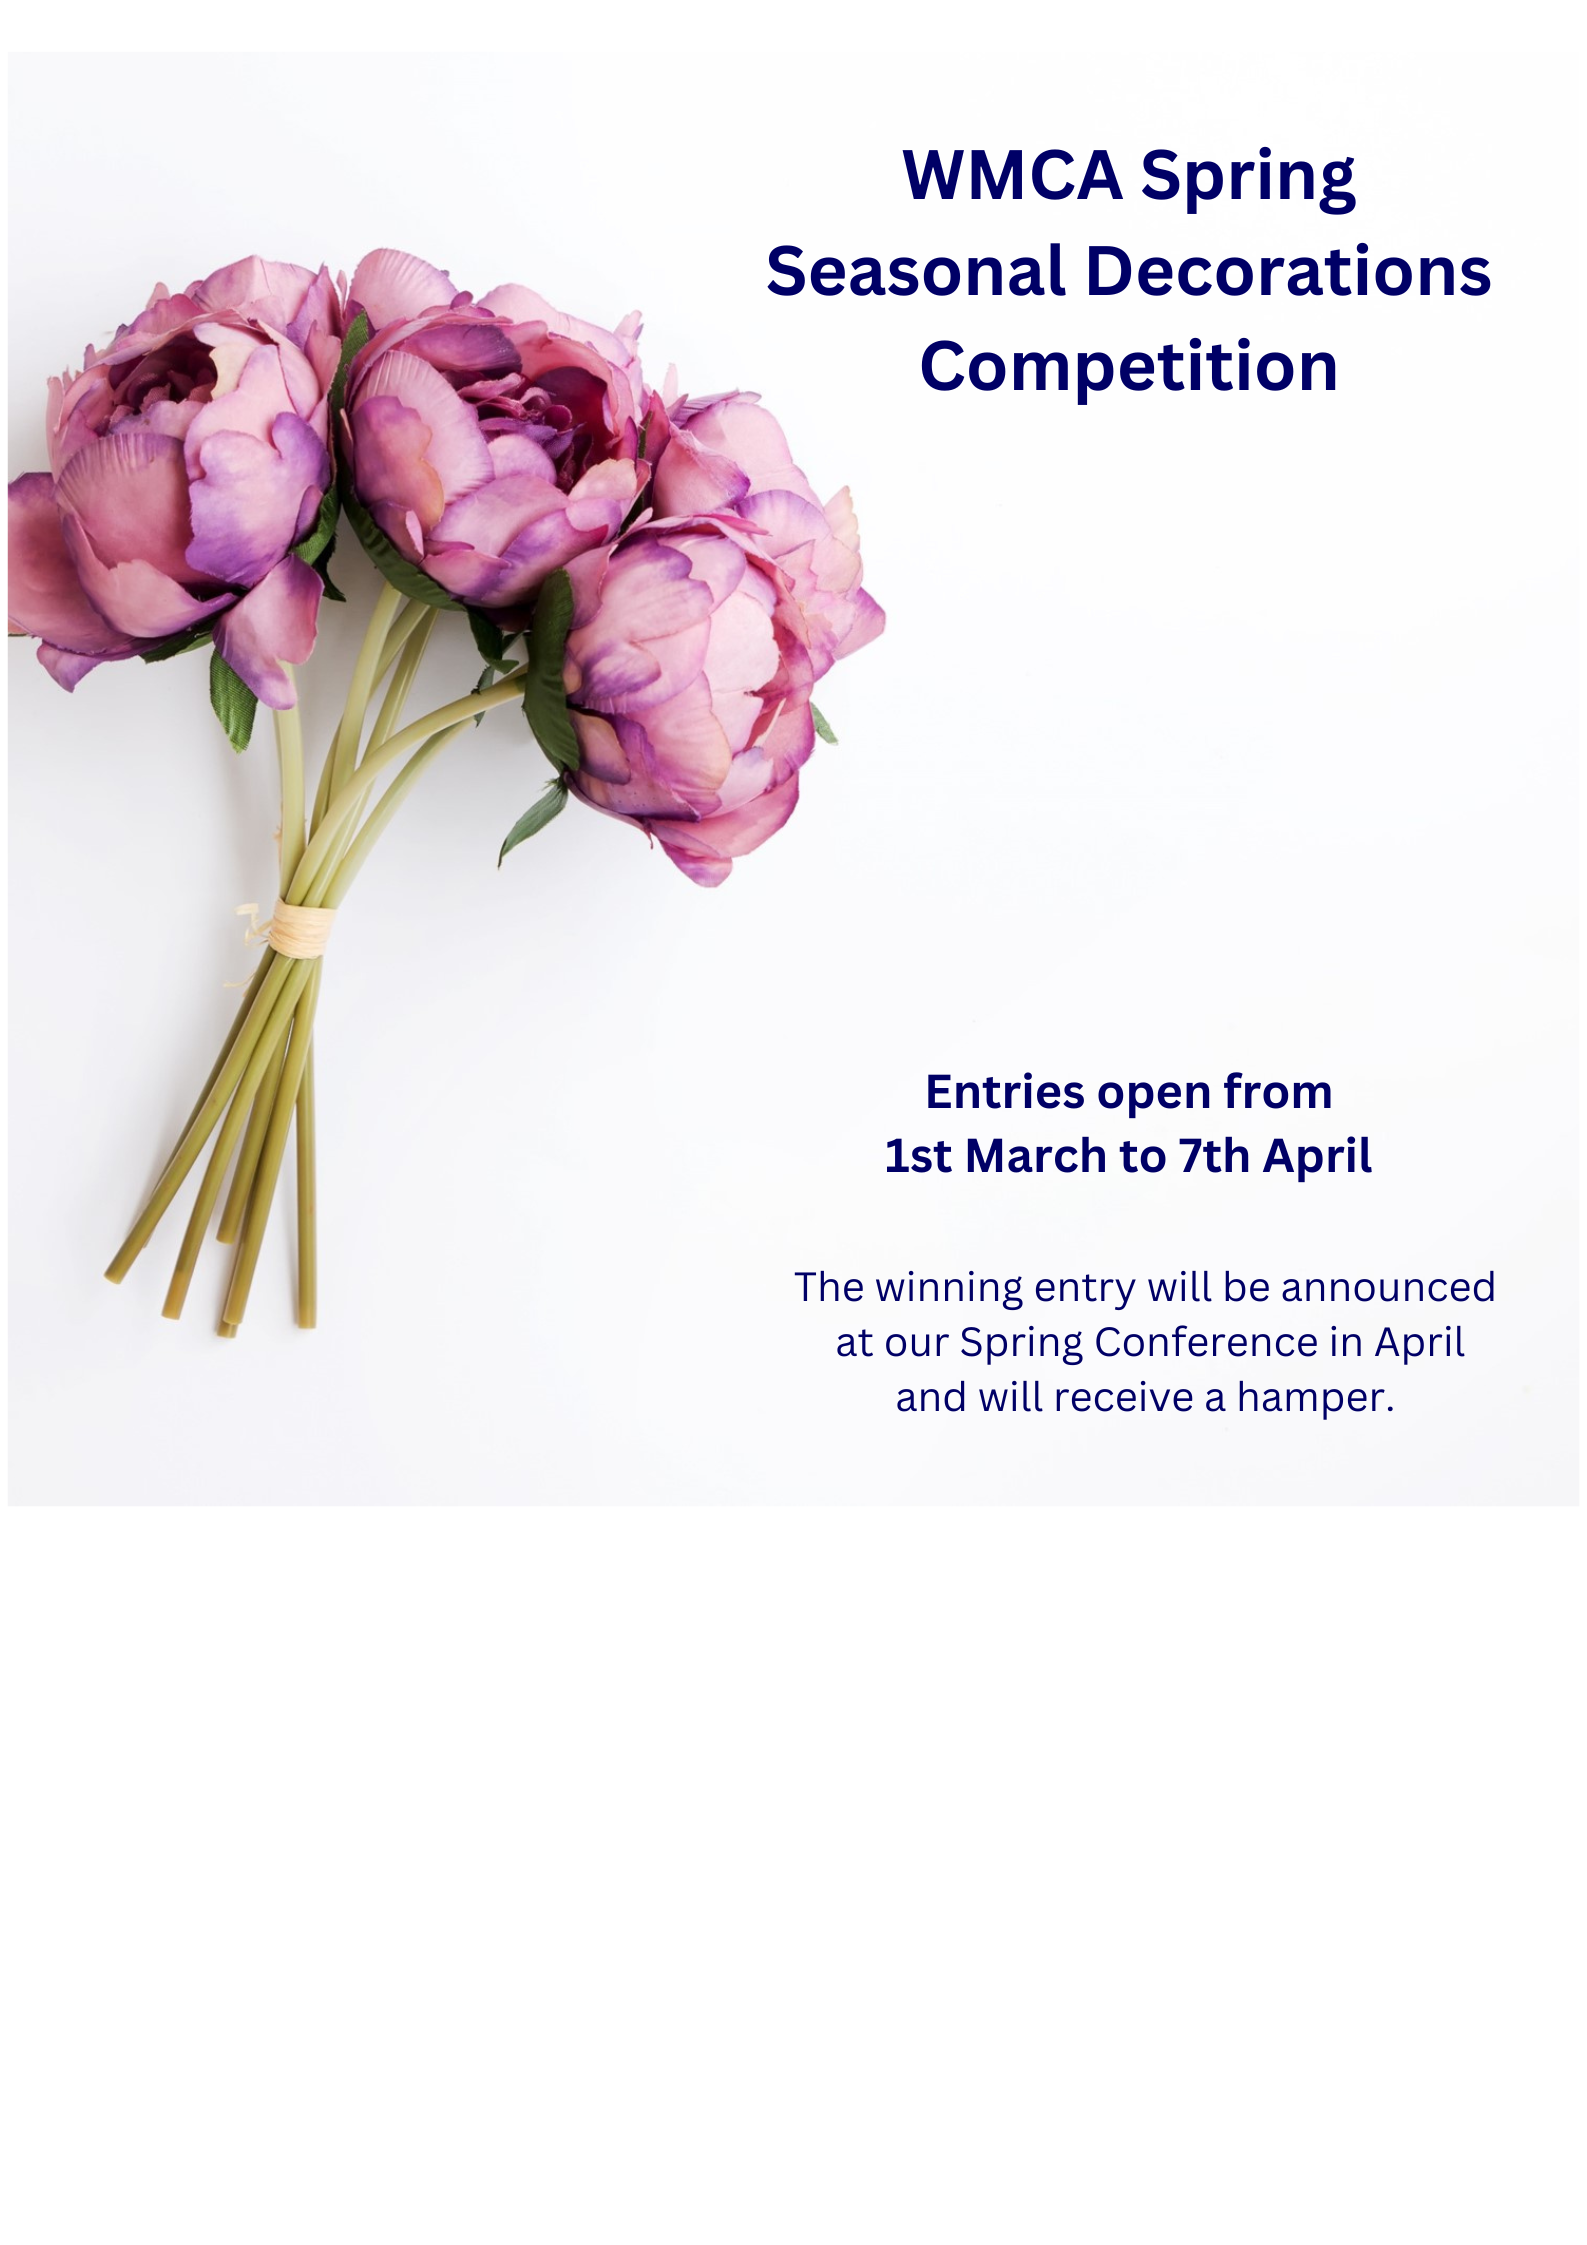 https://stratus.campaign-image.eu/images/32883000015213004_zc_v1_1709741483198_spring_decorations_competition_(2).png